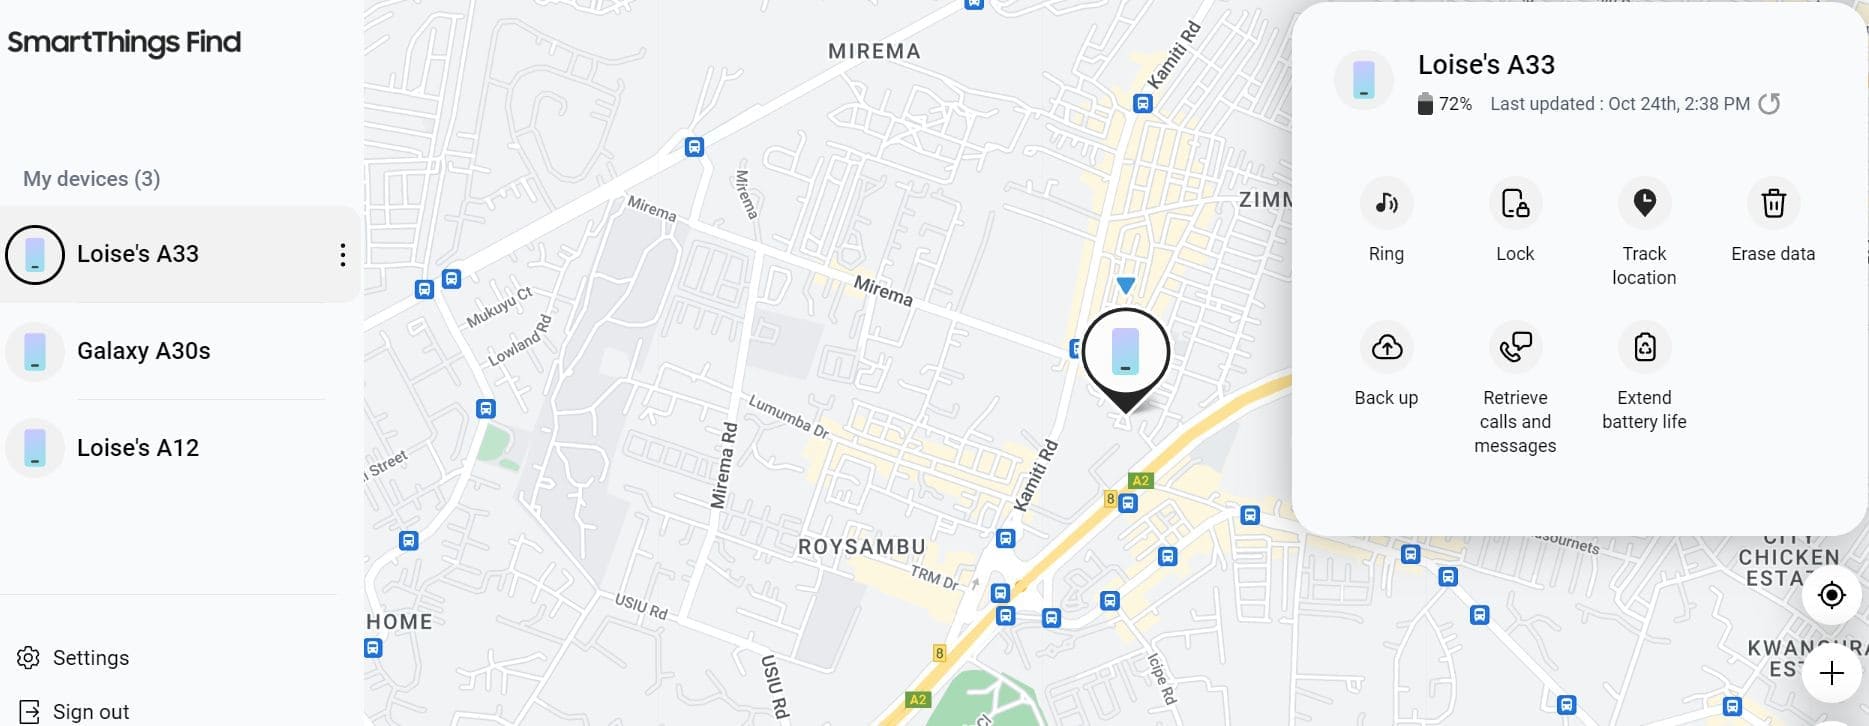 An image of SmartThings Find showing a phone’s location on a map